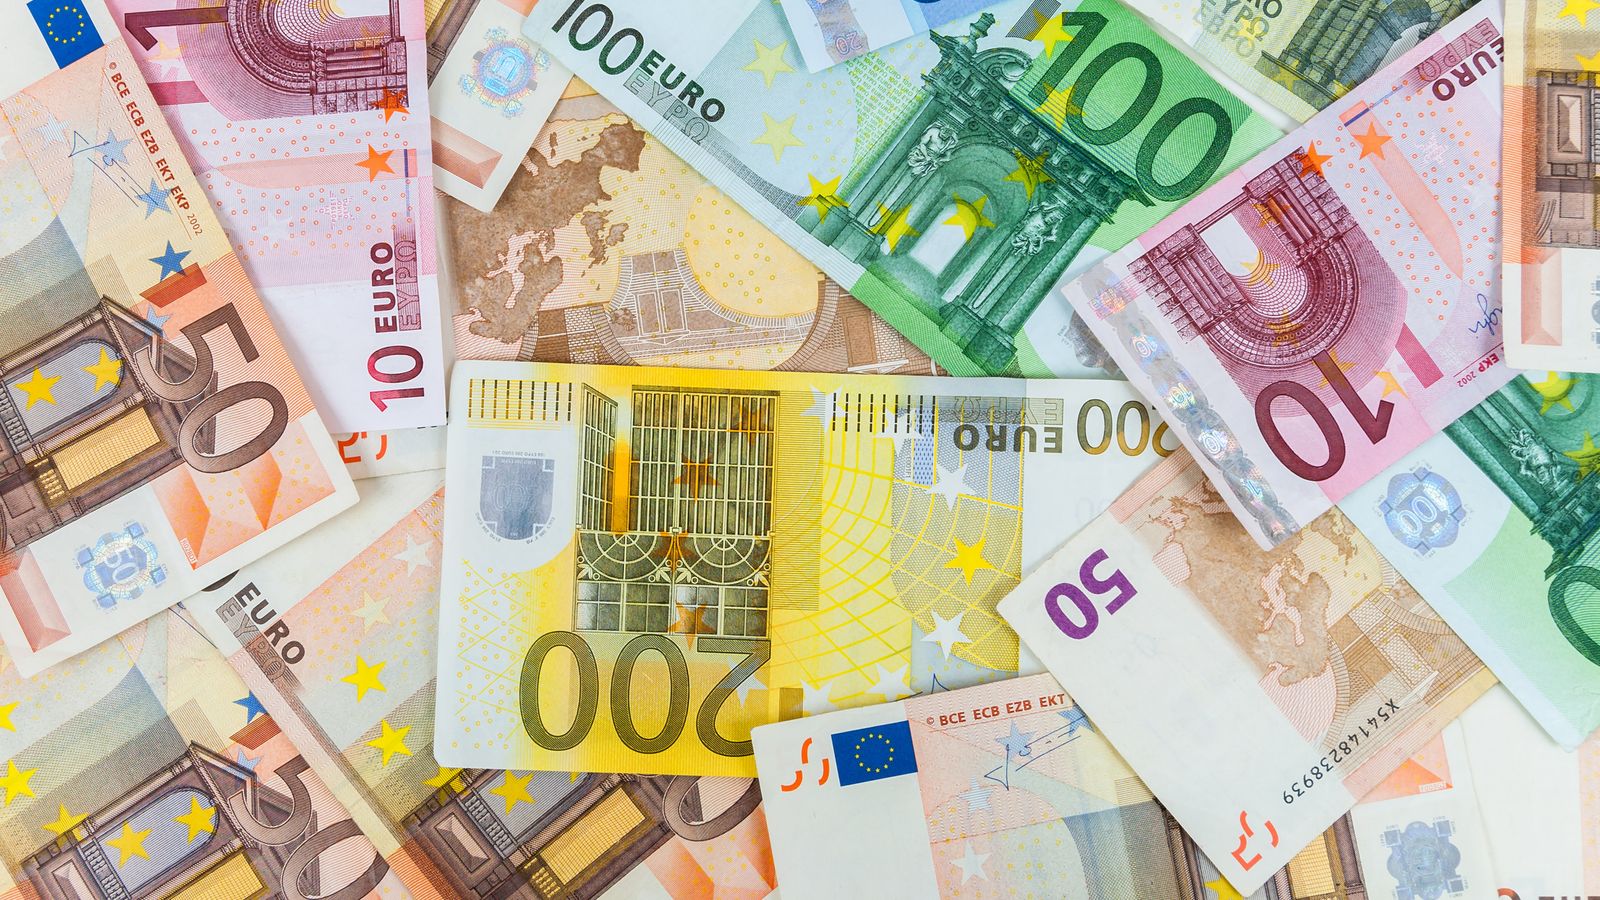 European Central Bank increases interest rate for 10th time in a row - hitting a record high